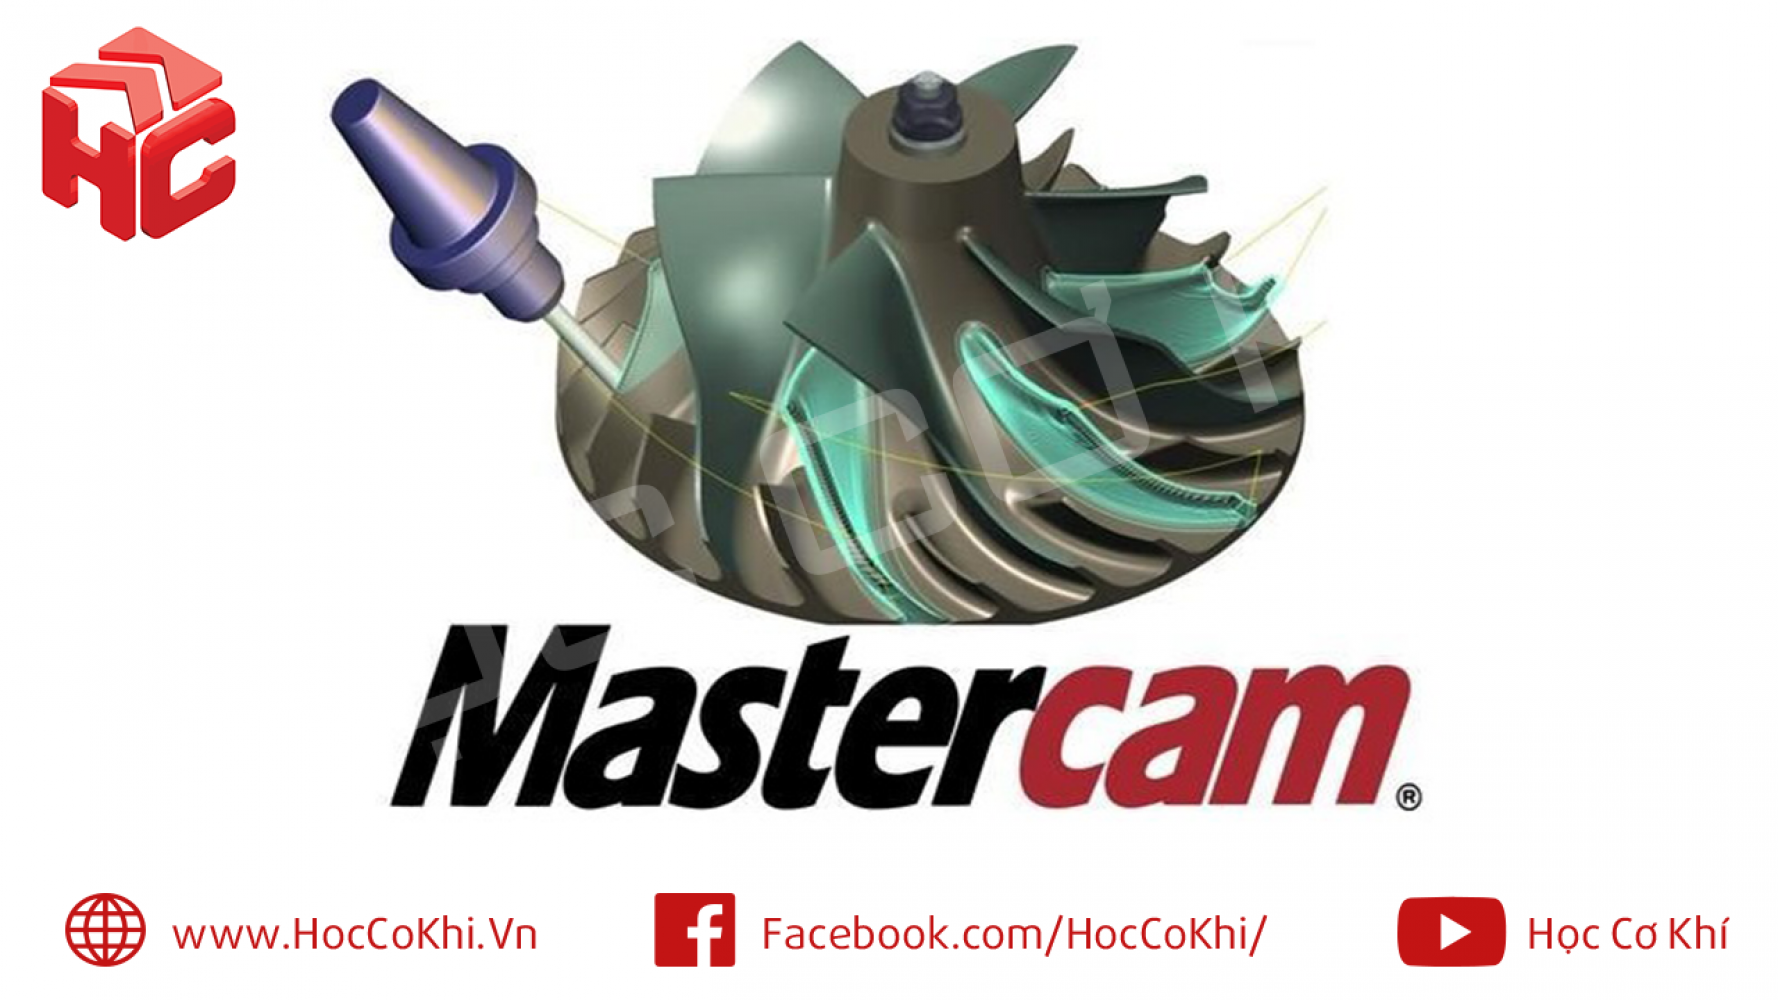 mastercam x5 free download with crack